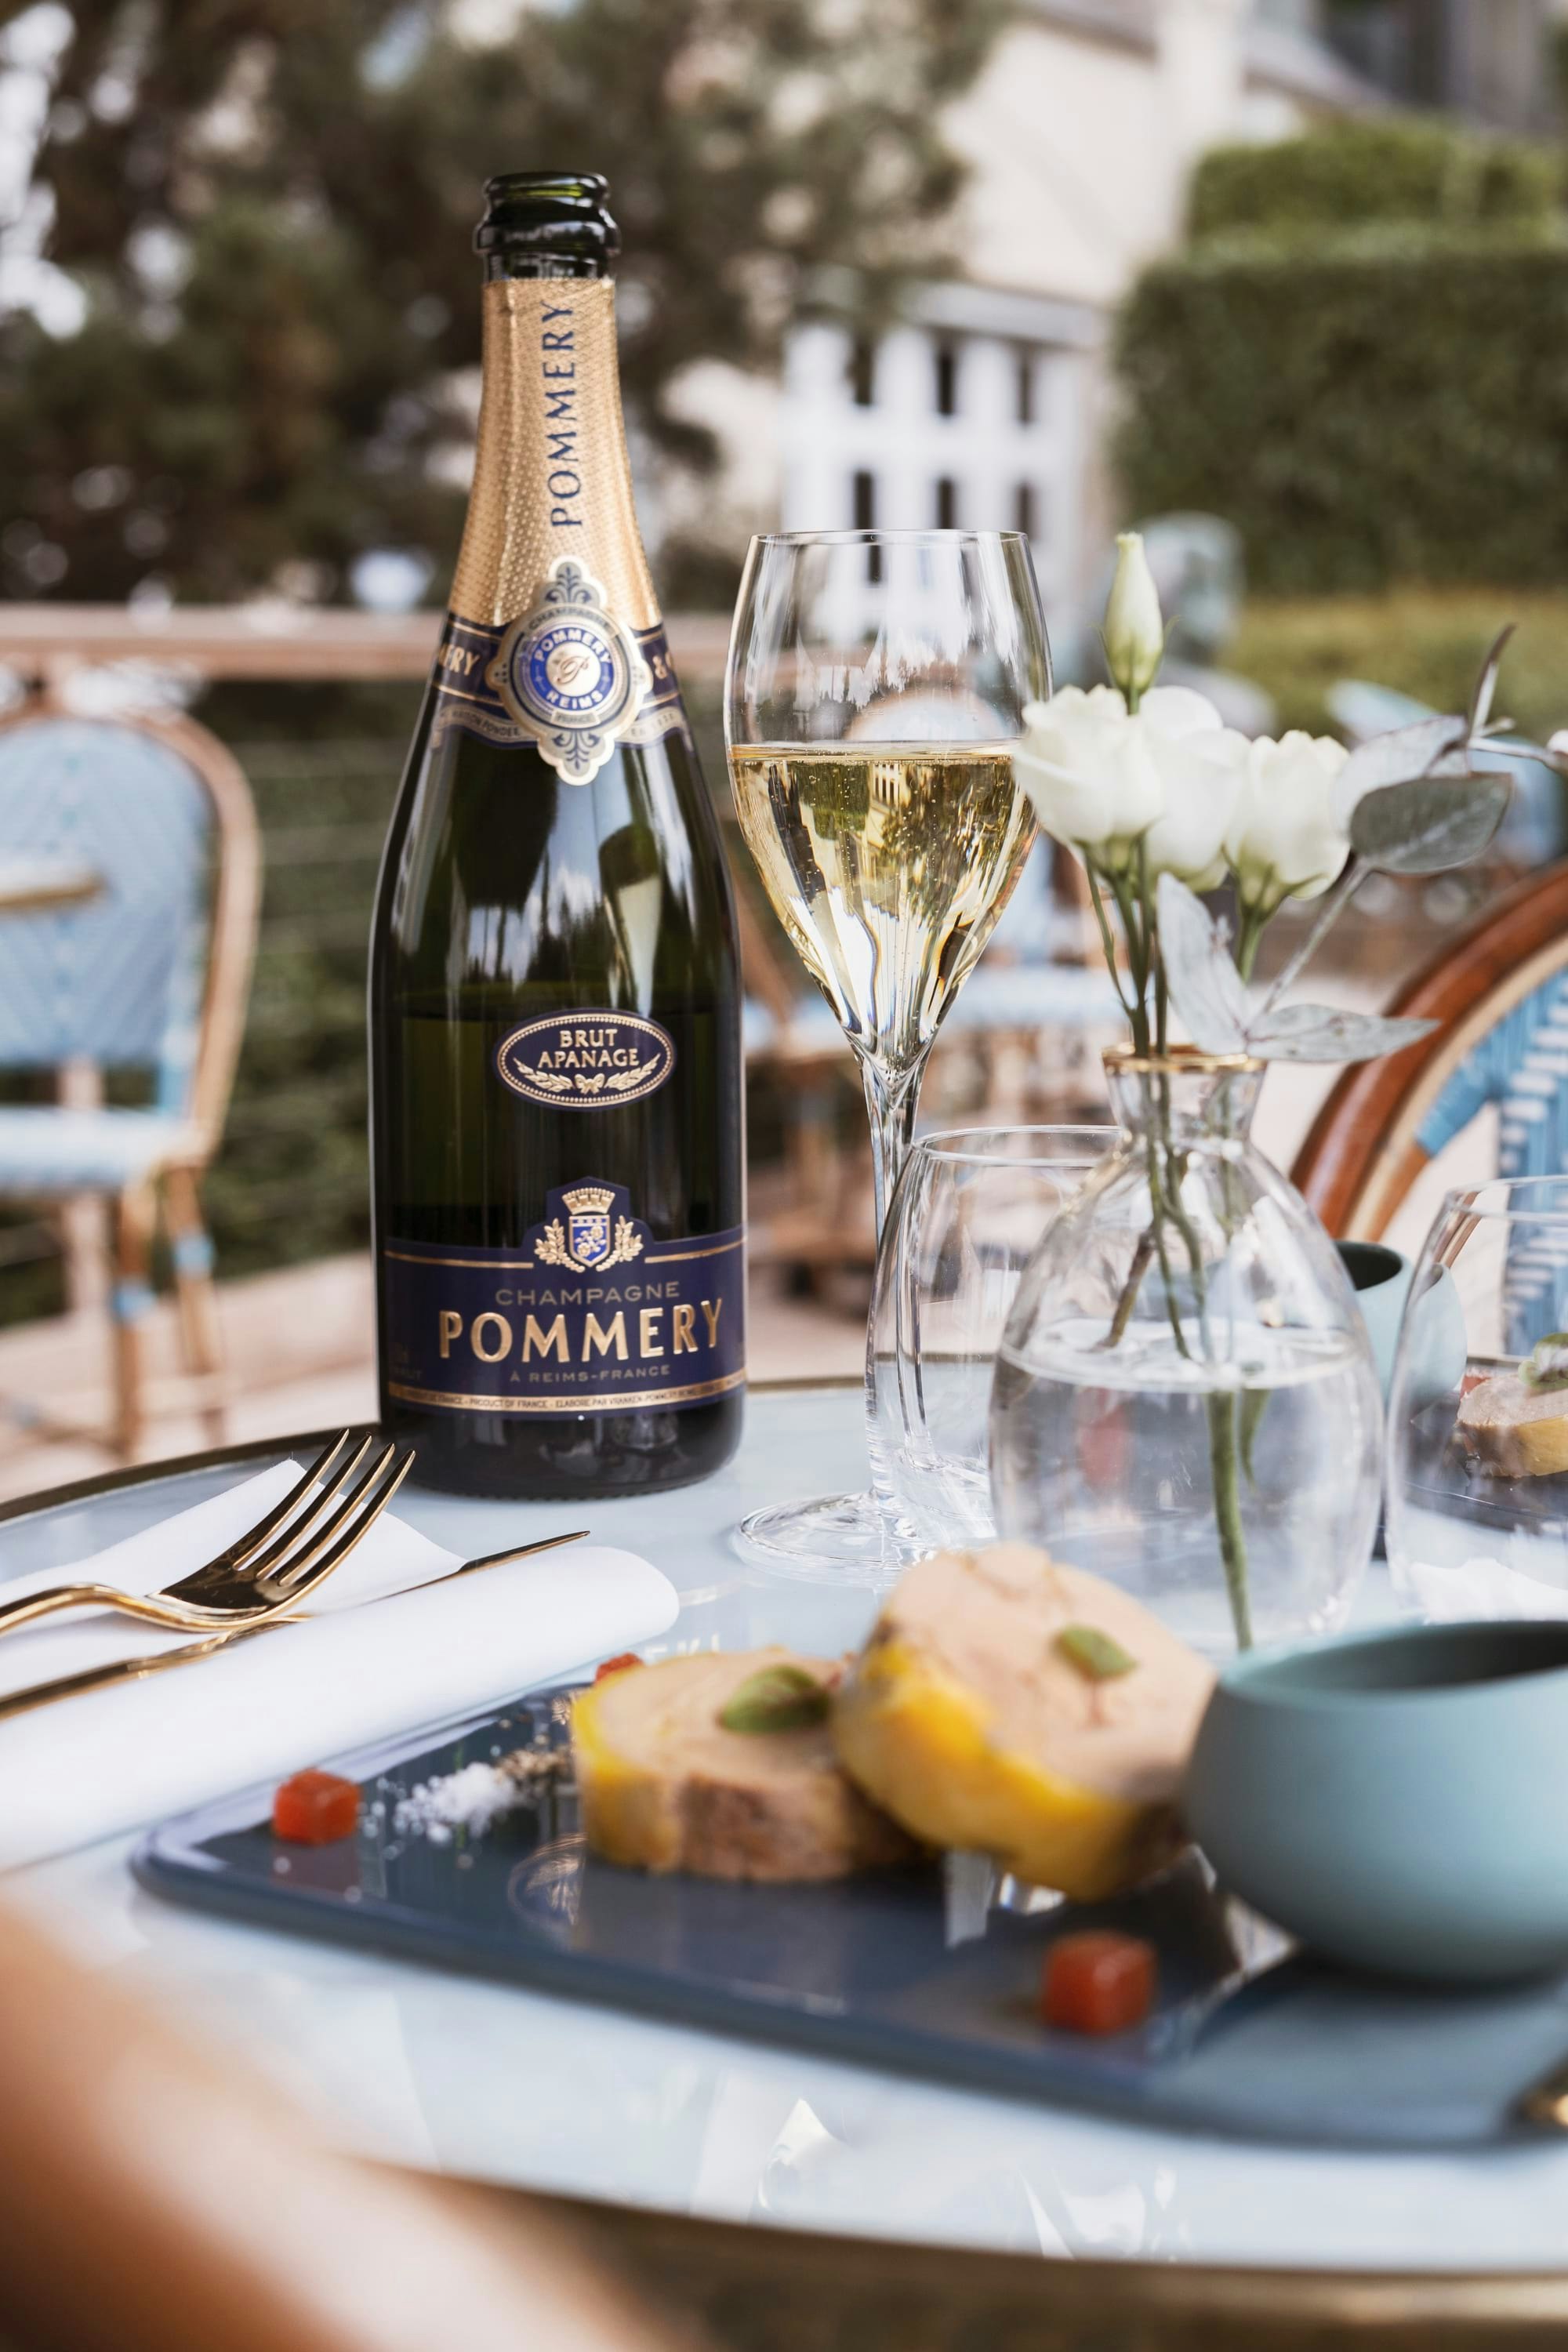 Bottle of Pommery Brut Apanage on table with glass and plate of foie gras